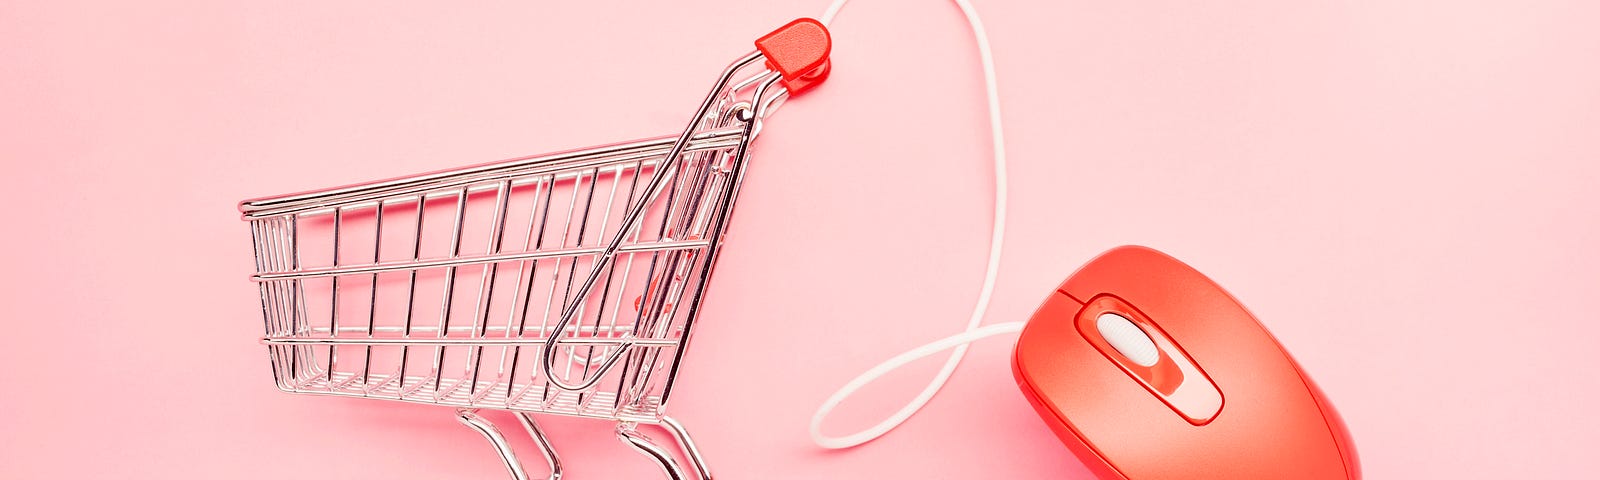 A small shopping cart and red computer mouse on pink background, symbolizing online shopping.